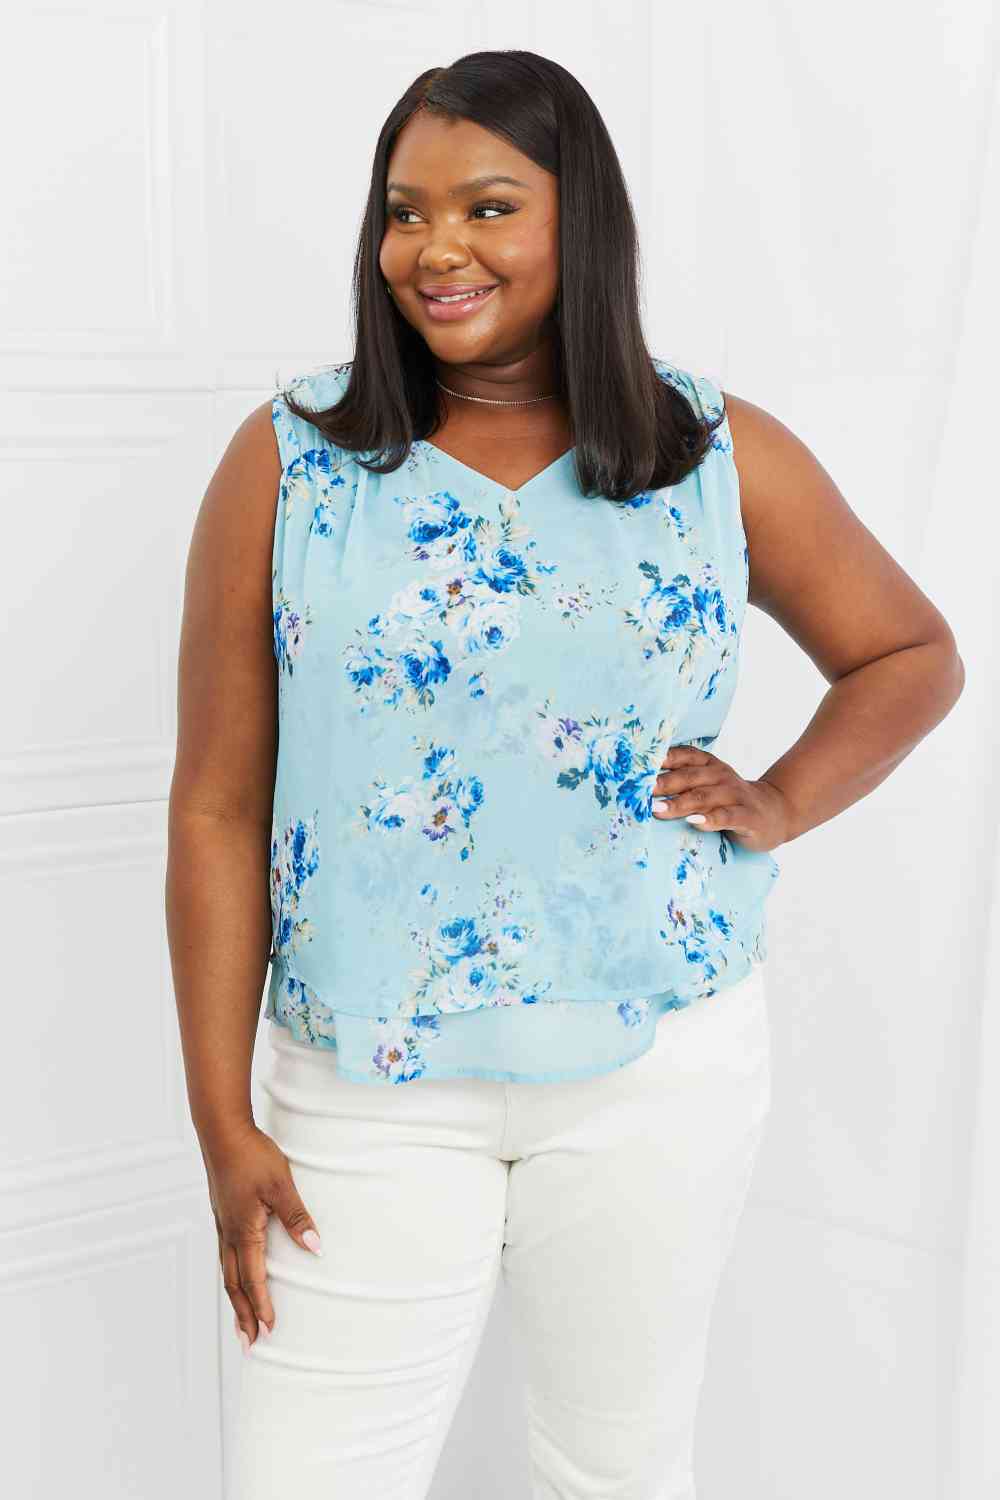 Off To Brunch Full Size Floral Tank Top - Camis & Tops - Shirts & Tops - 3 - 2024